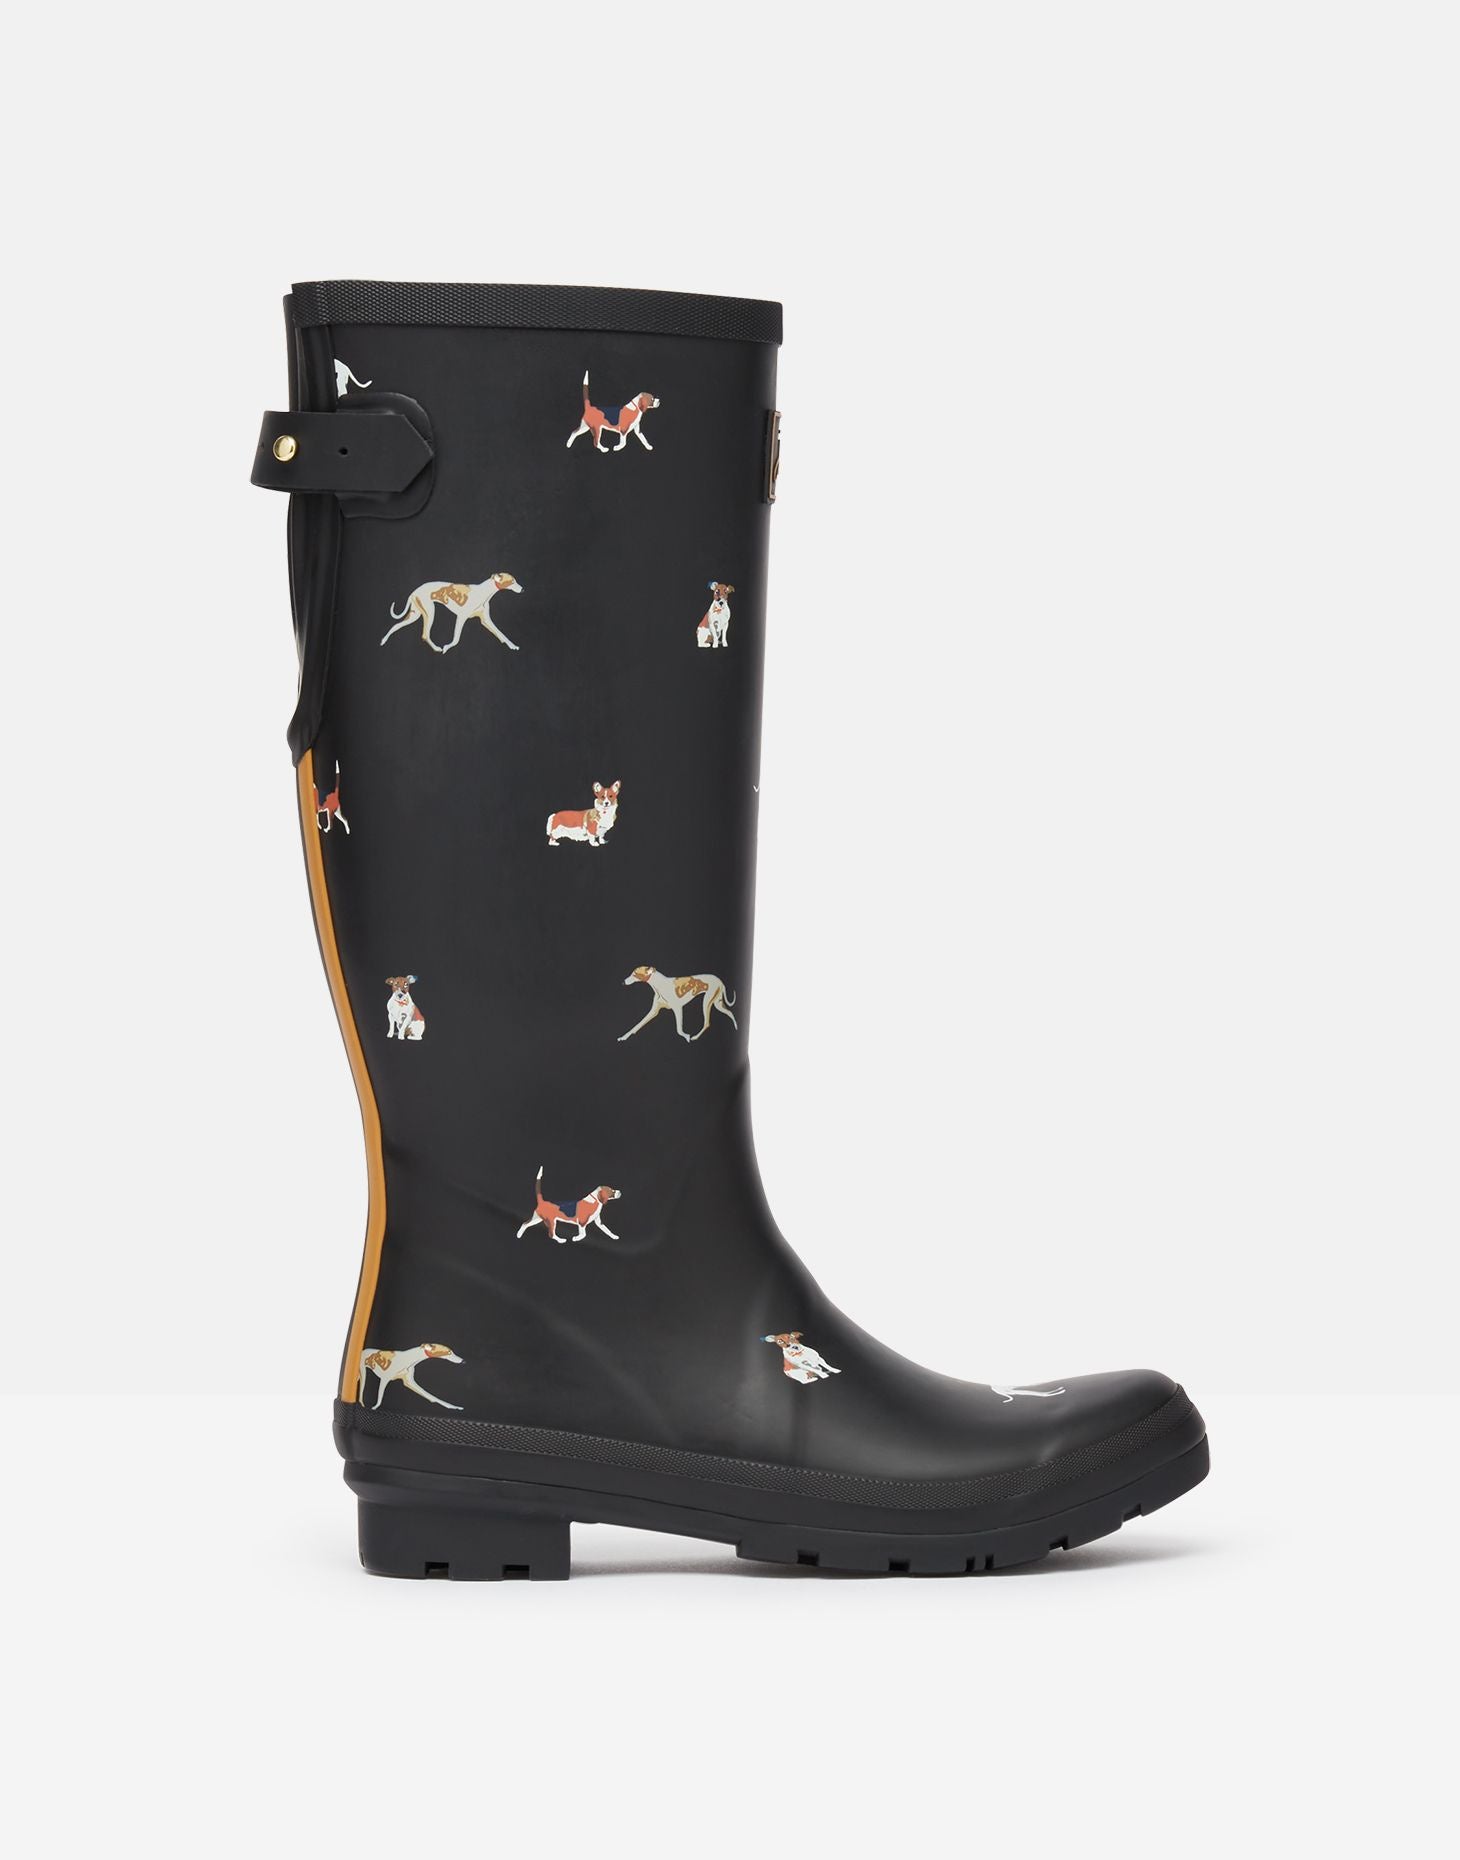 Women's Printed Wellies With Adjustable Back Gusset - BLKDOG